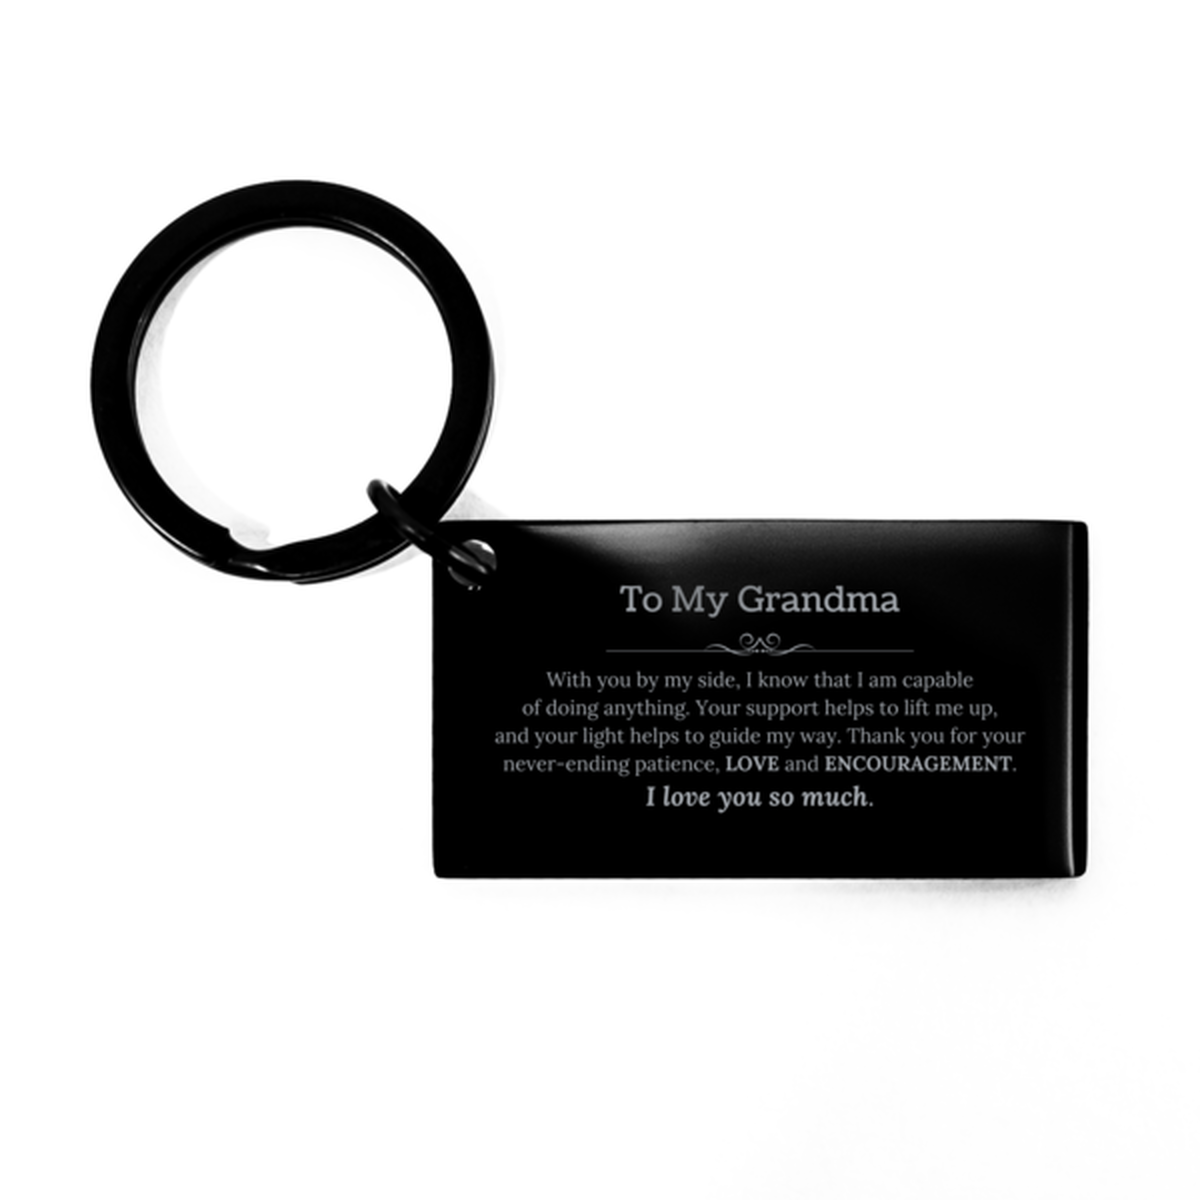 Appreciation Grandma Keychain Gifts, To My Grandma Birthday Christmas Wedding Keepsake Gifts for Grandma With you by my side, I know that I am capable of doing anything. I love you so much